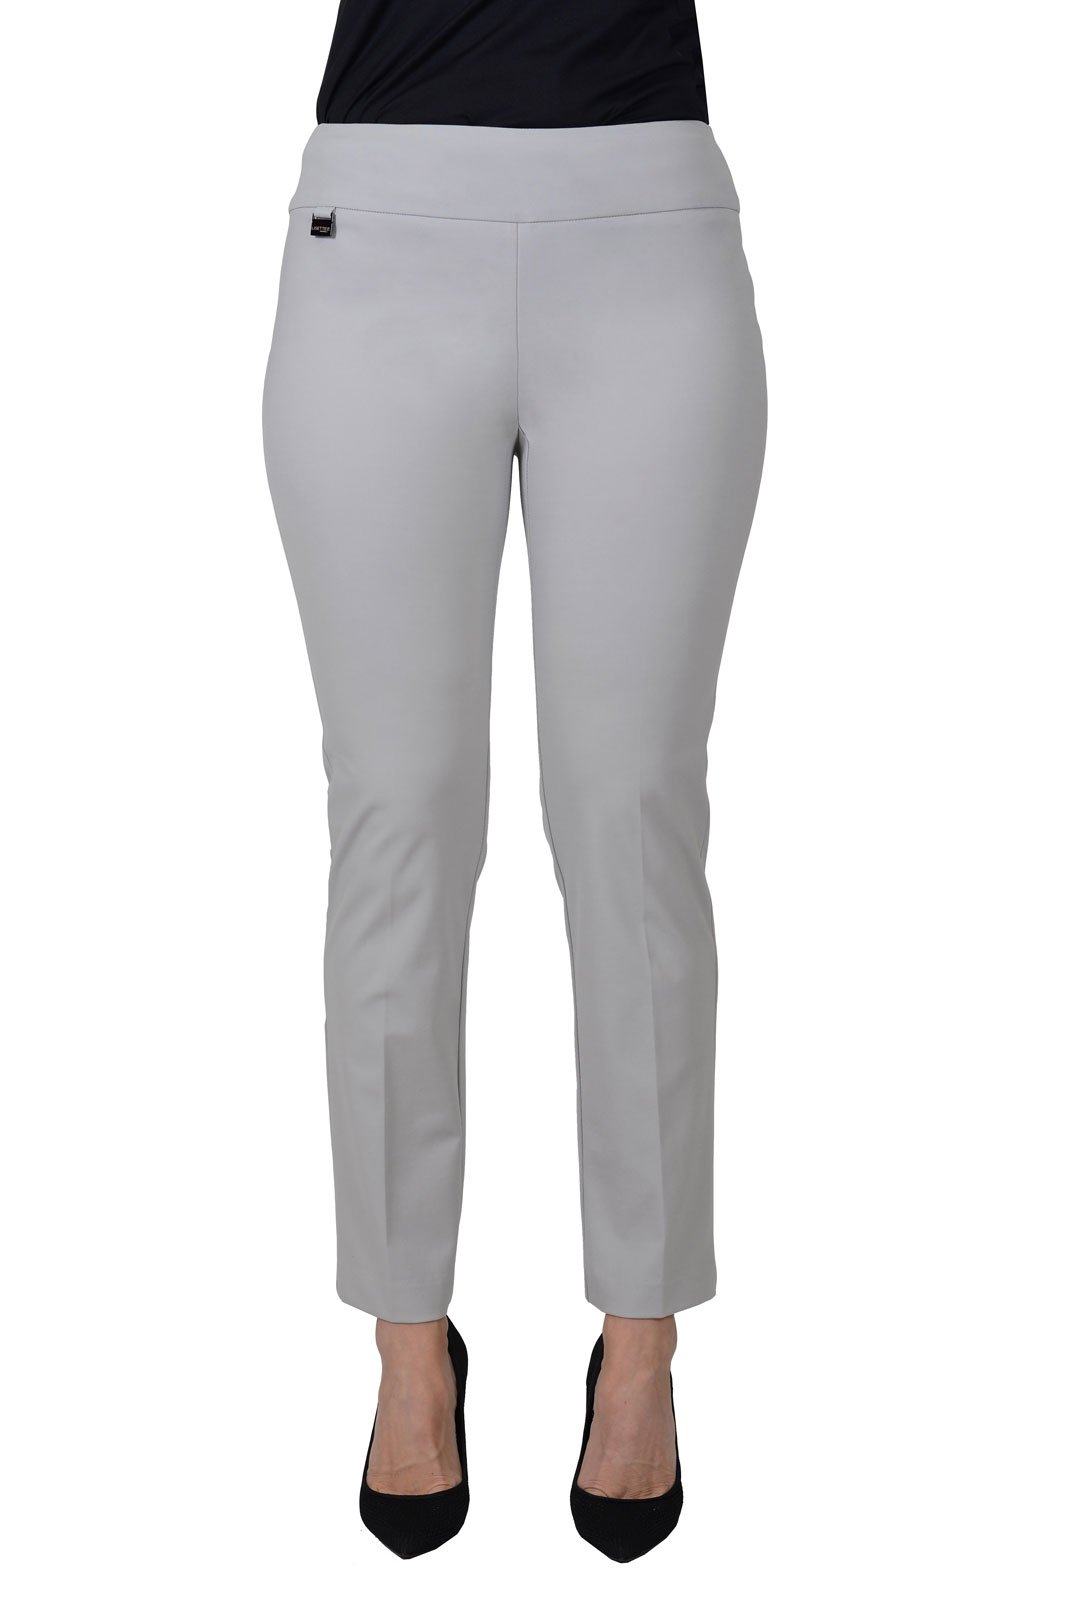 Kathryne Fabric 28'' Ankle Pant Lisette L Montreal